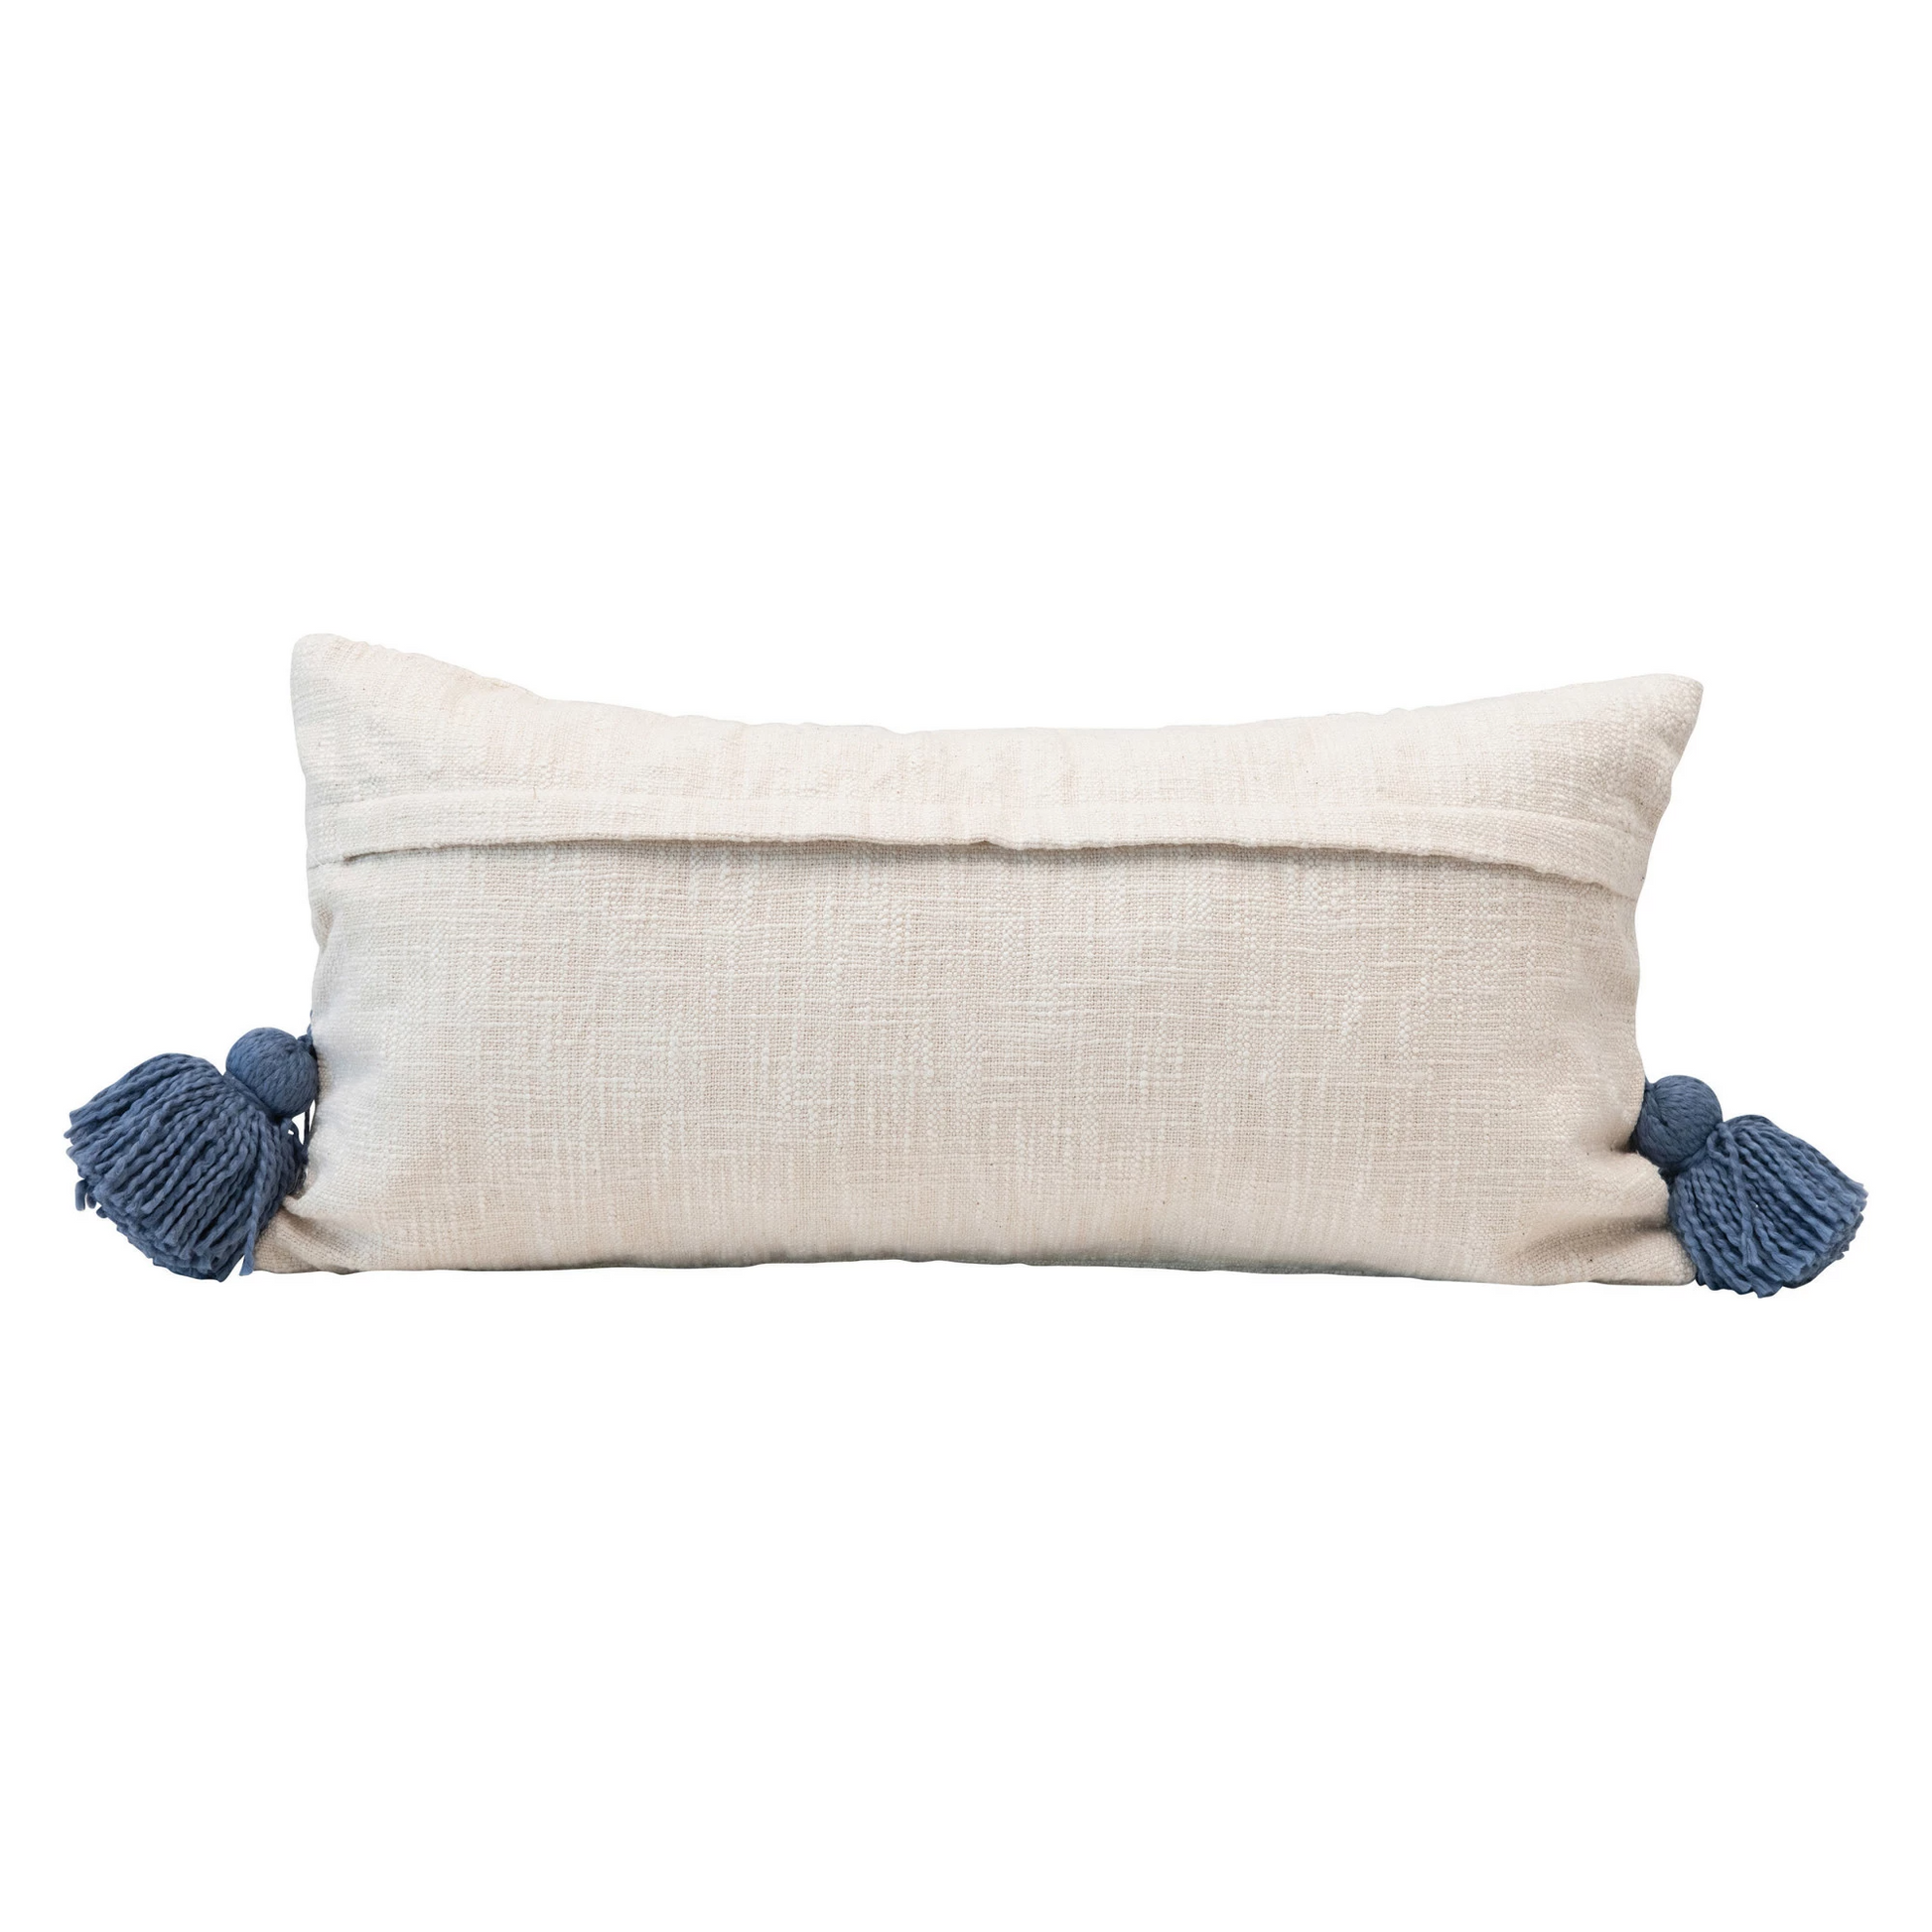 Blue and White Lumbar Pillow with Embroidered Squiggles & Tassels - 24-in x 12-in - Mellow Monkey